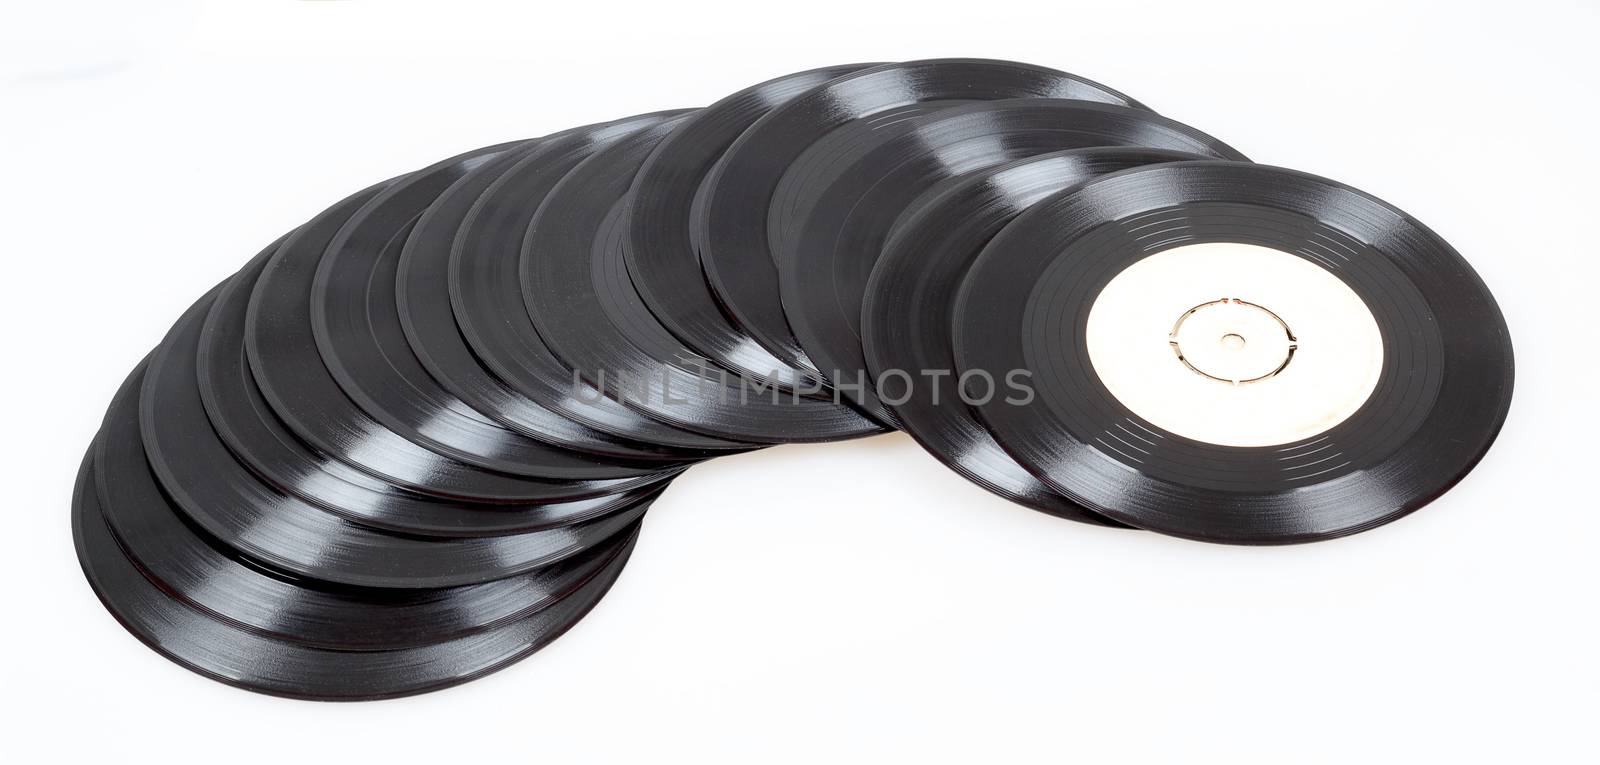 group of black vinyl records  by artush